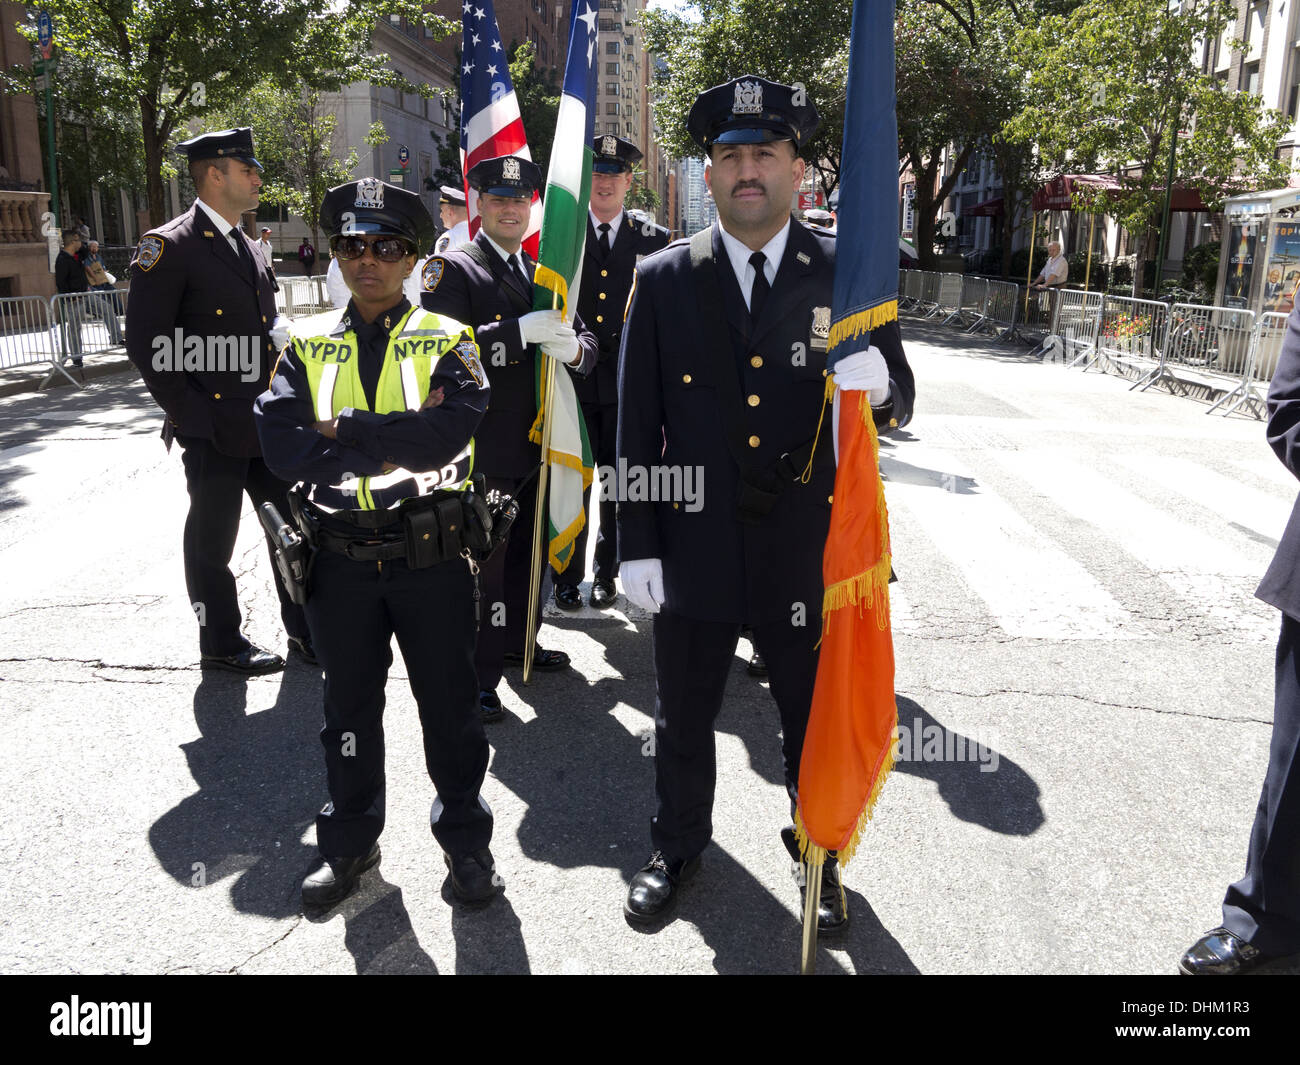 Multi-ethnic, NYPD color guard at the Annual Muslim Day Parade, New York City, 2013. Stock Photo